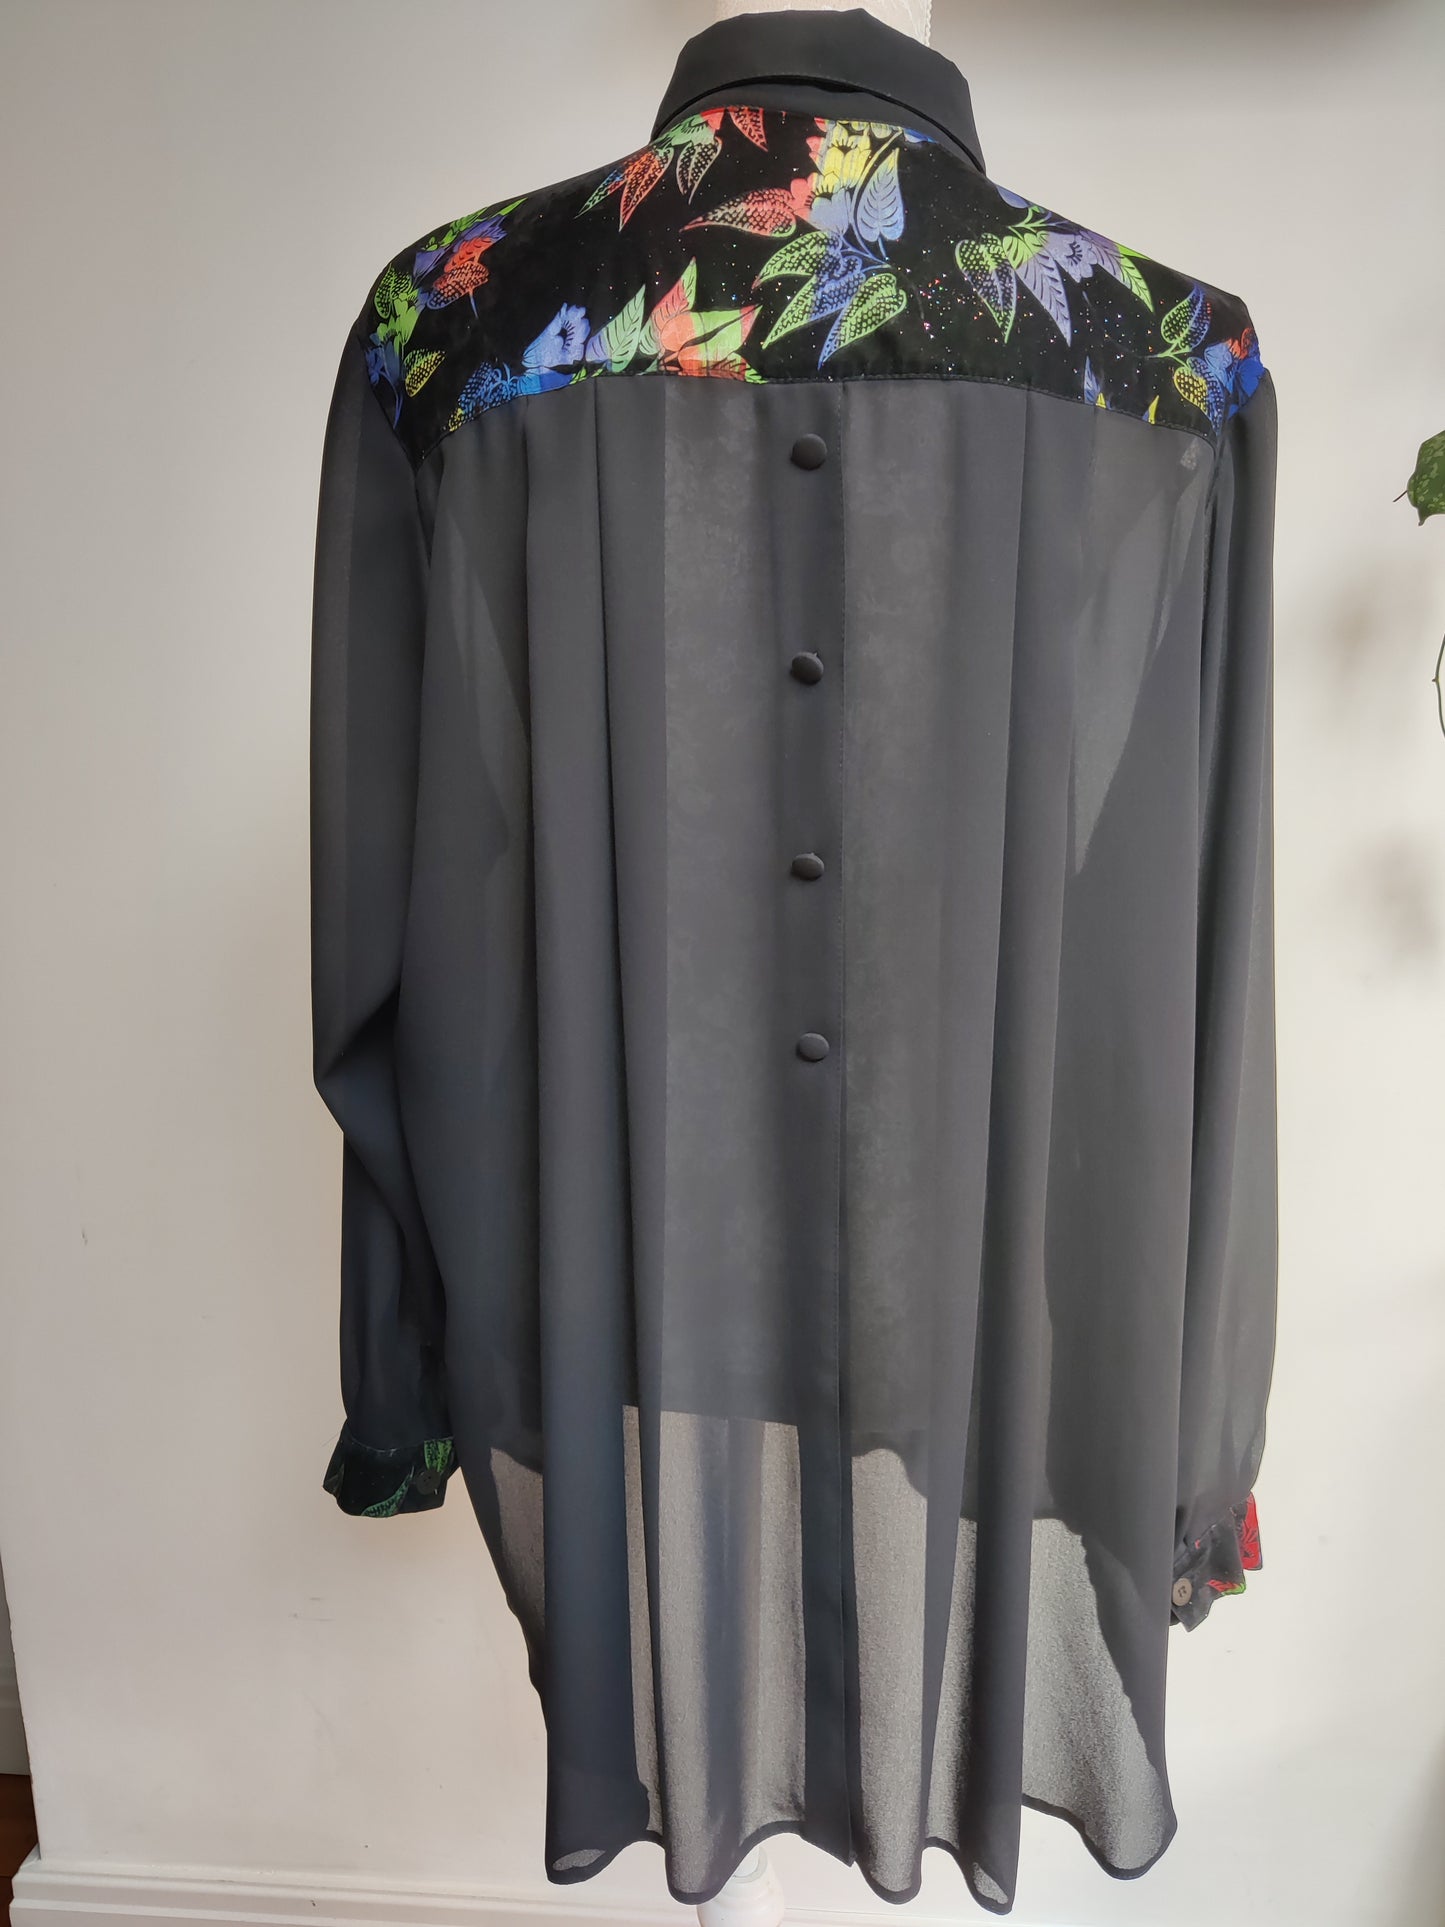 Stunning vintage black tunic shirt with sparkly floral collar. Size 26.